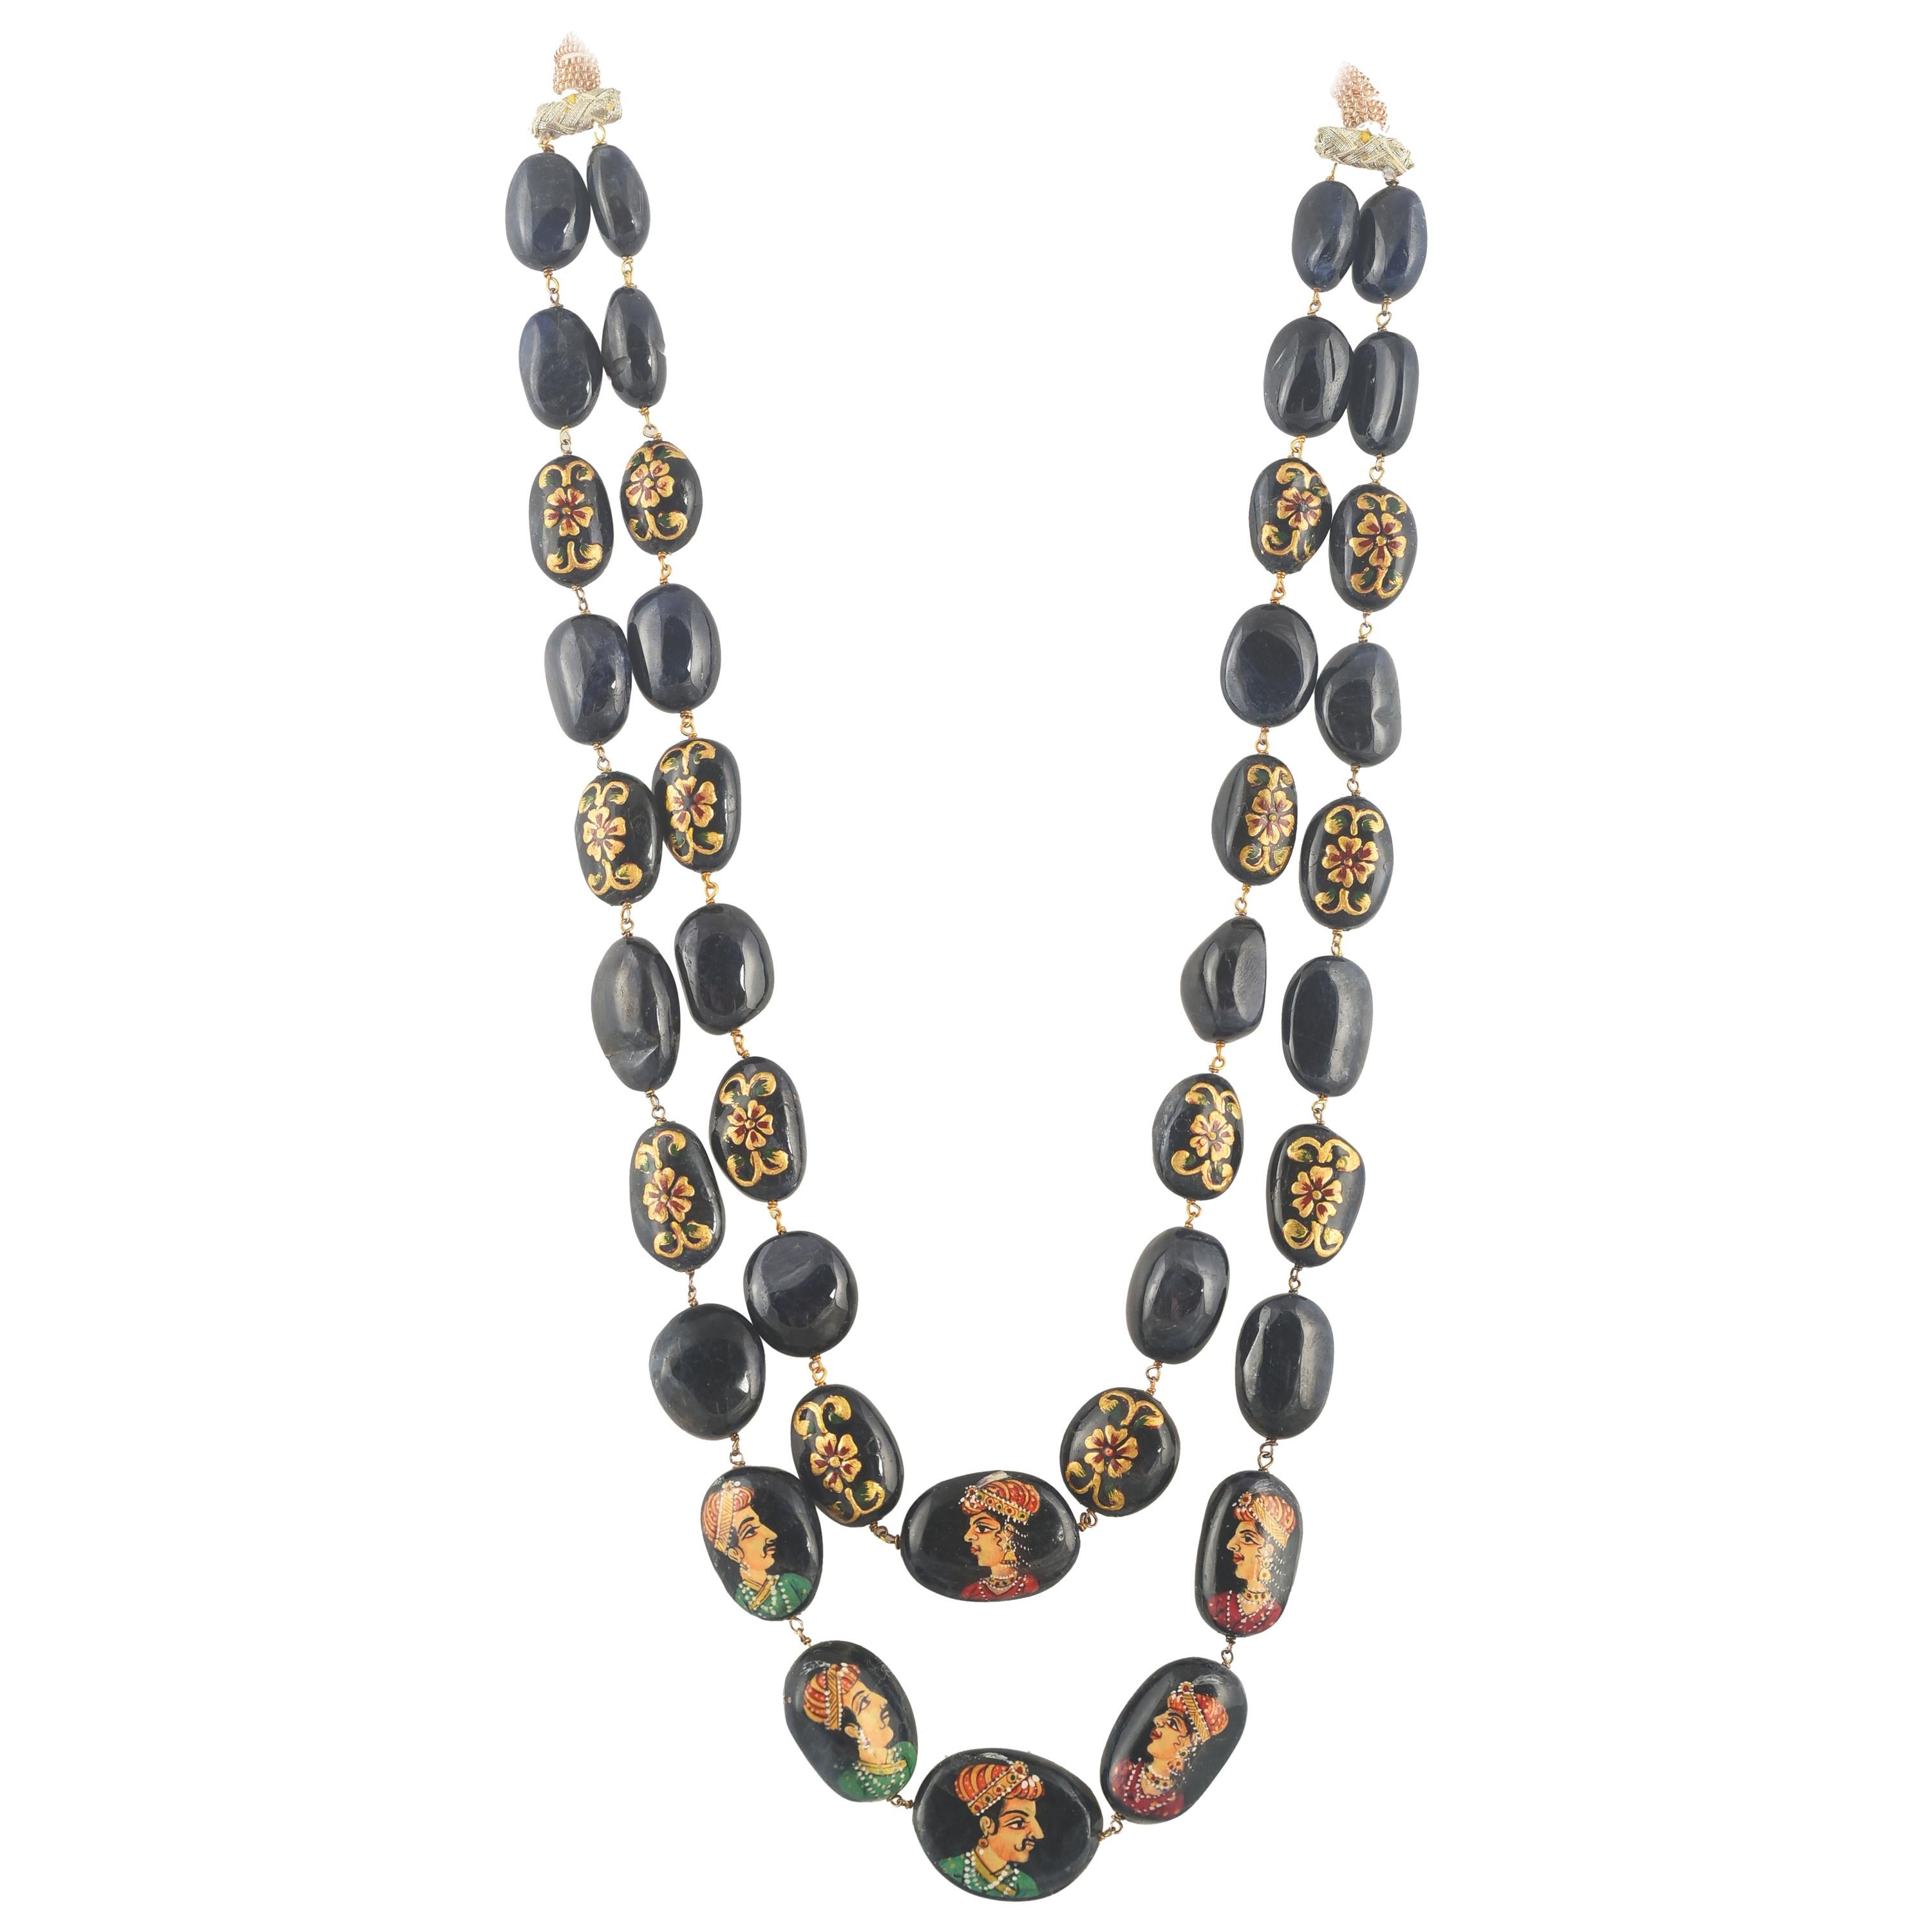 1553 Carat of Natural Burma, Mughal Hand Painted Blue Sapphire Bead Necklace